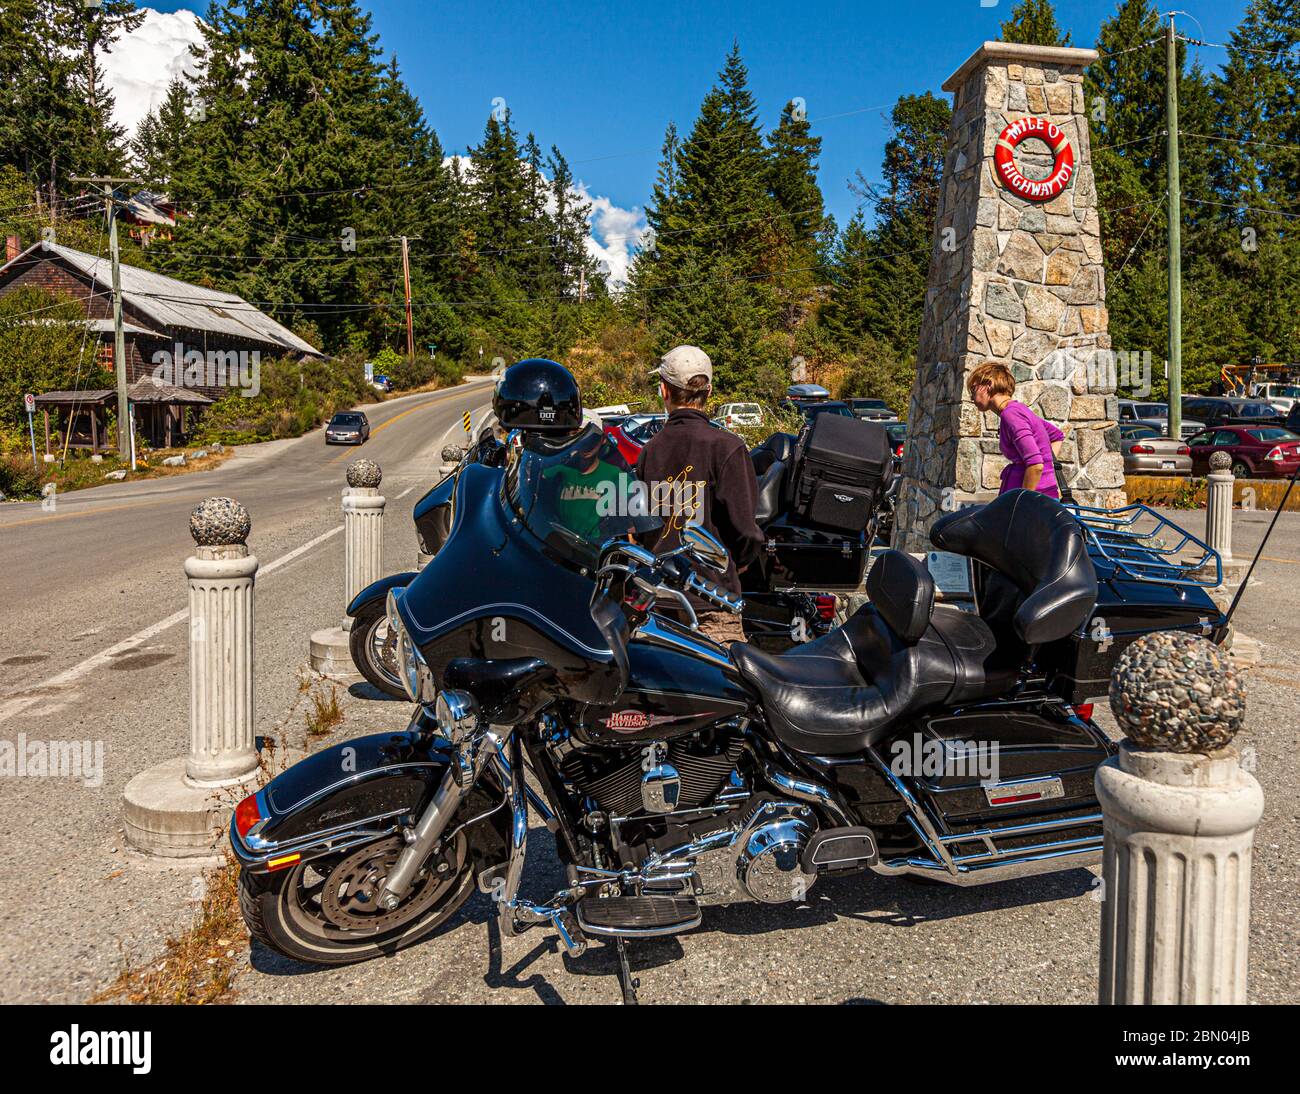 Mile 0 of Highway 101 in Lund, British Columbia, Canada Stock Photo